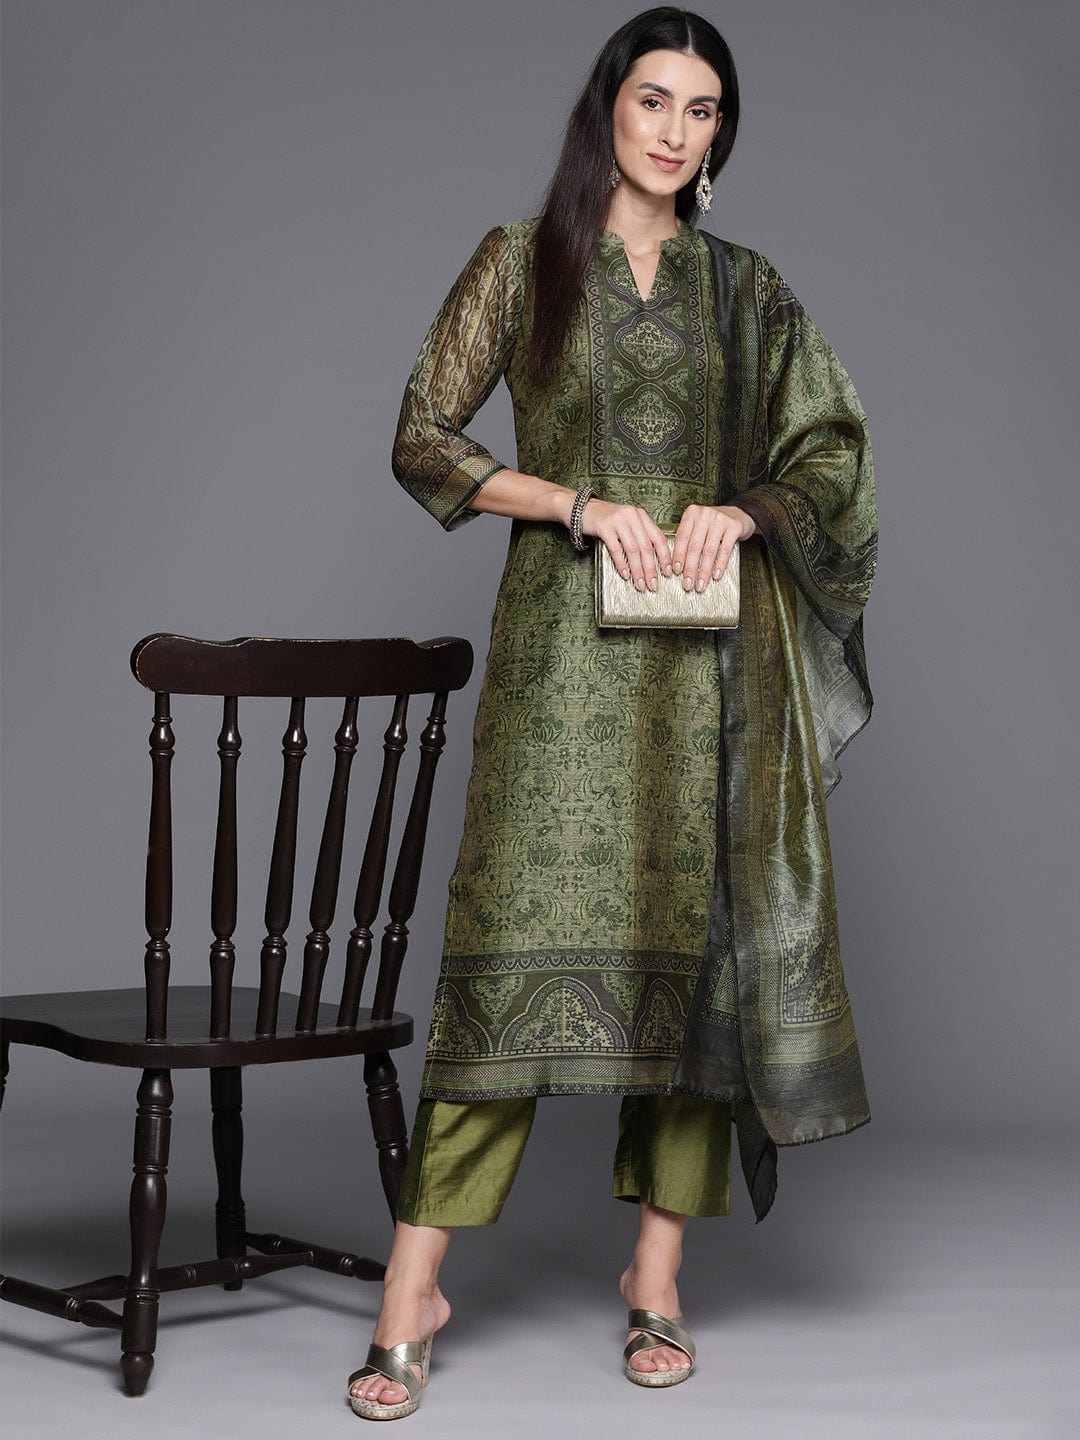 Etnic Motif Printed Straight Kurta Paired With Solid Bottom And Printed Dupatta